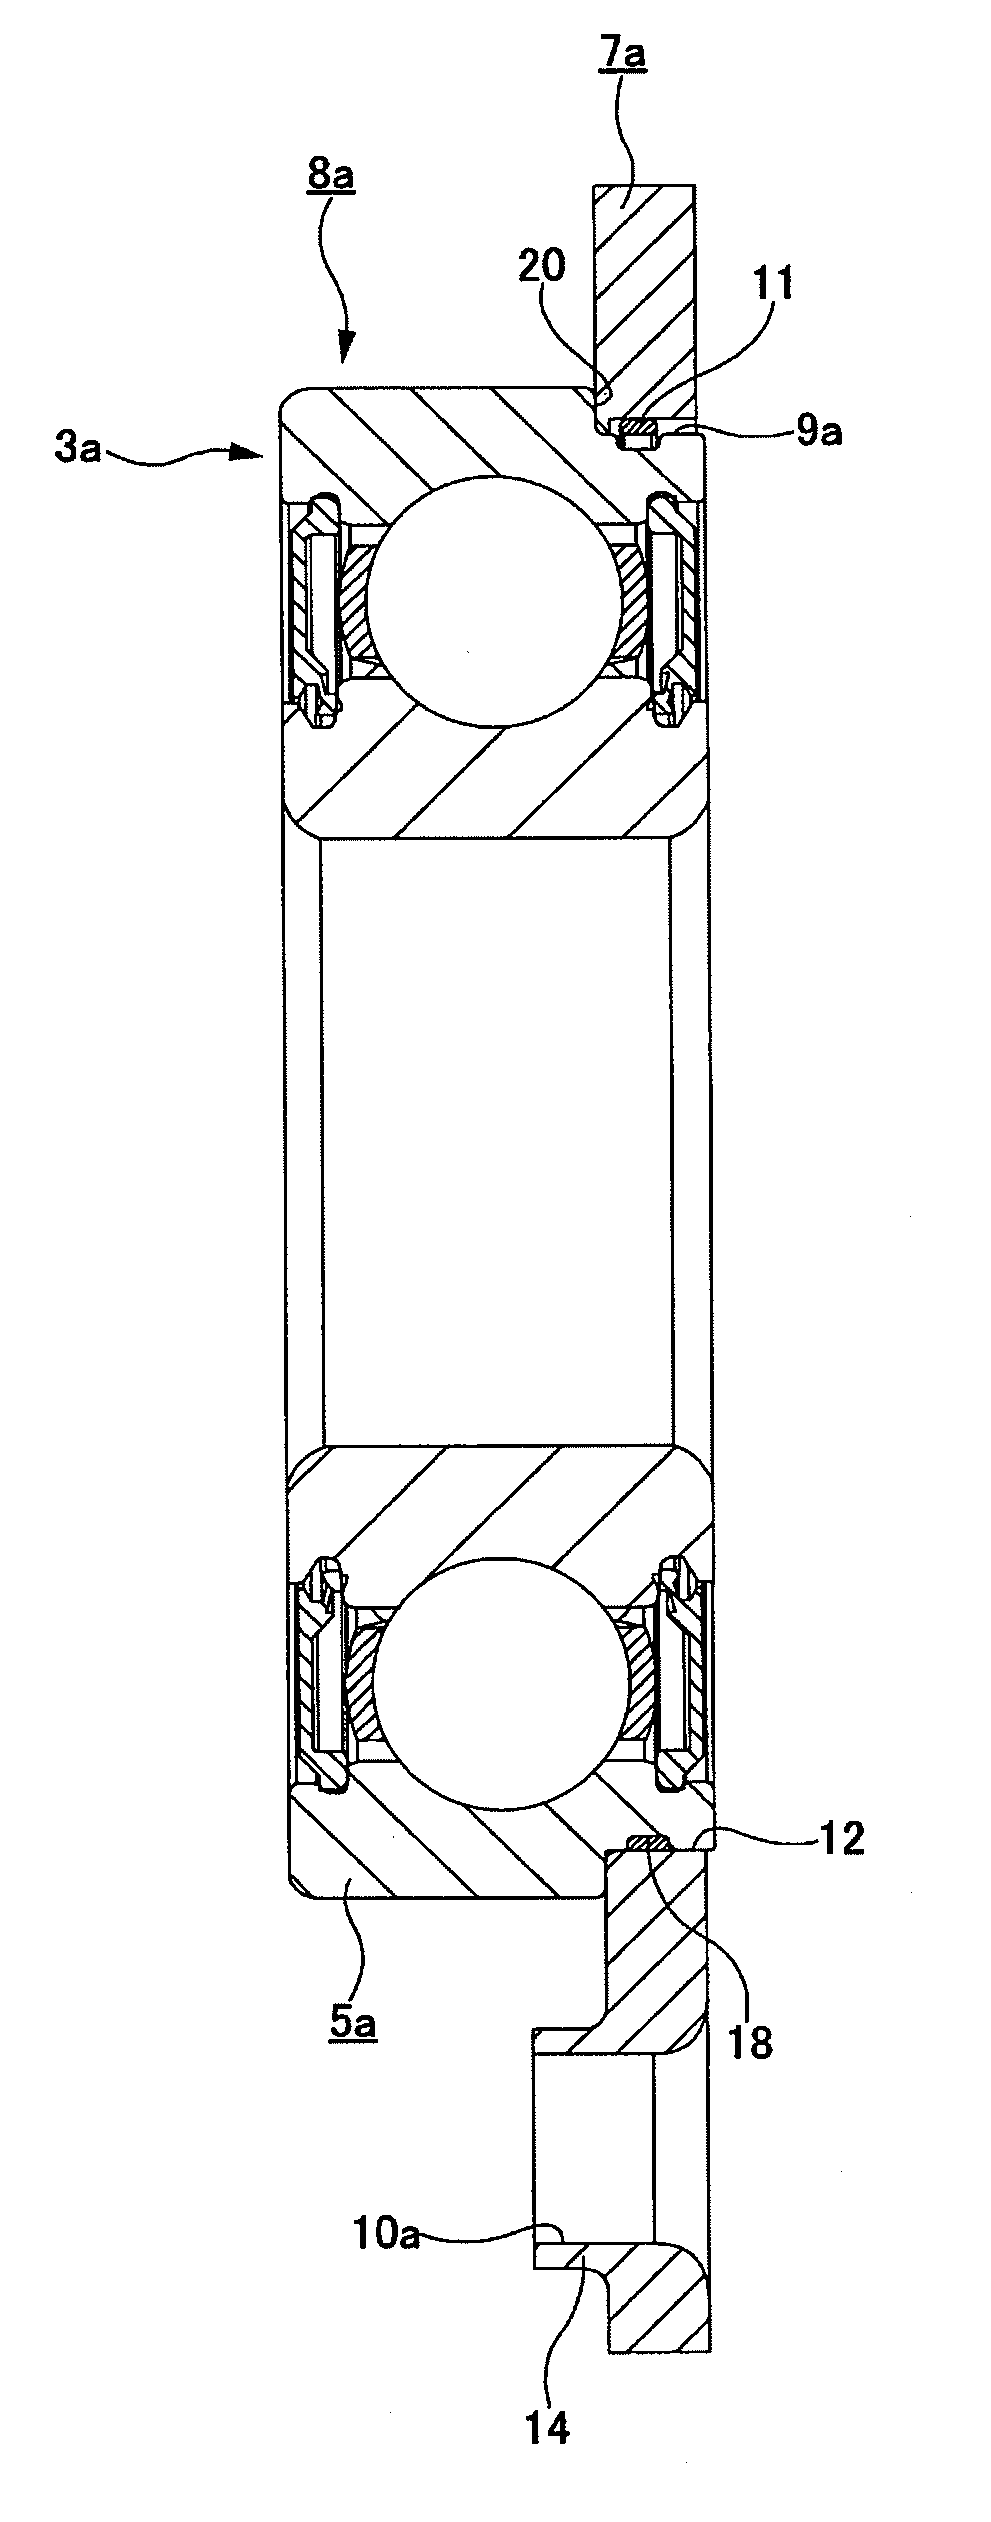 Rolling bearing unit for rotation support unit